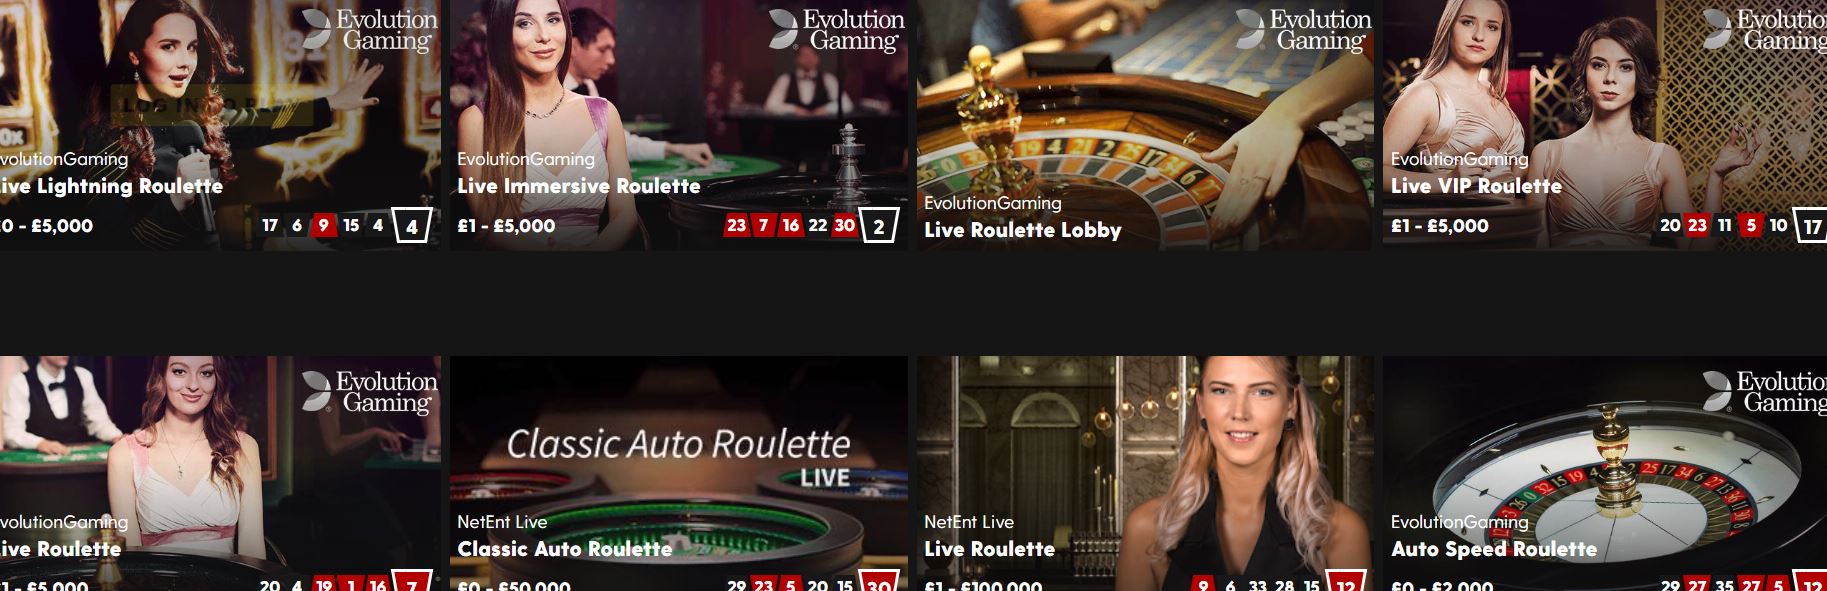 Online casino promotions are validated in roulette.